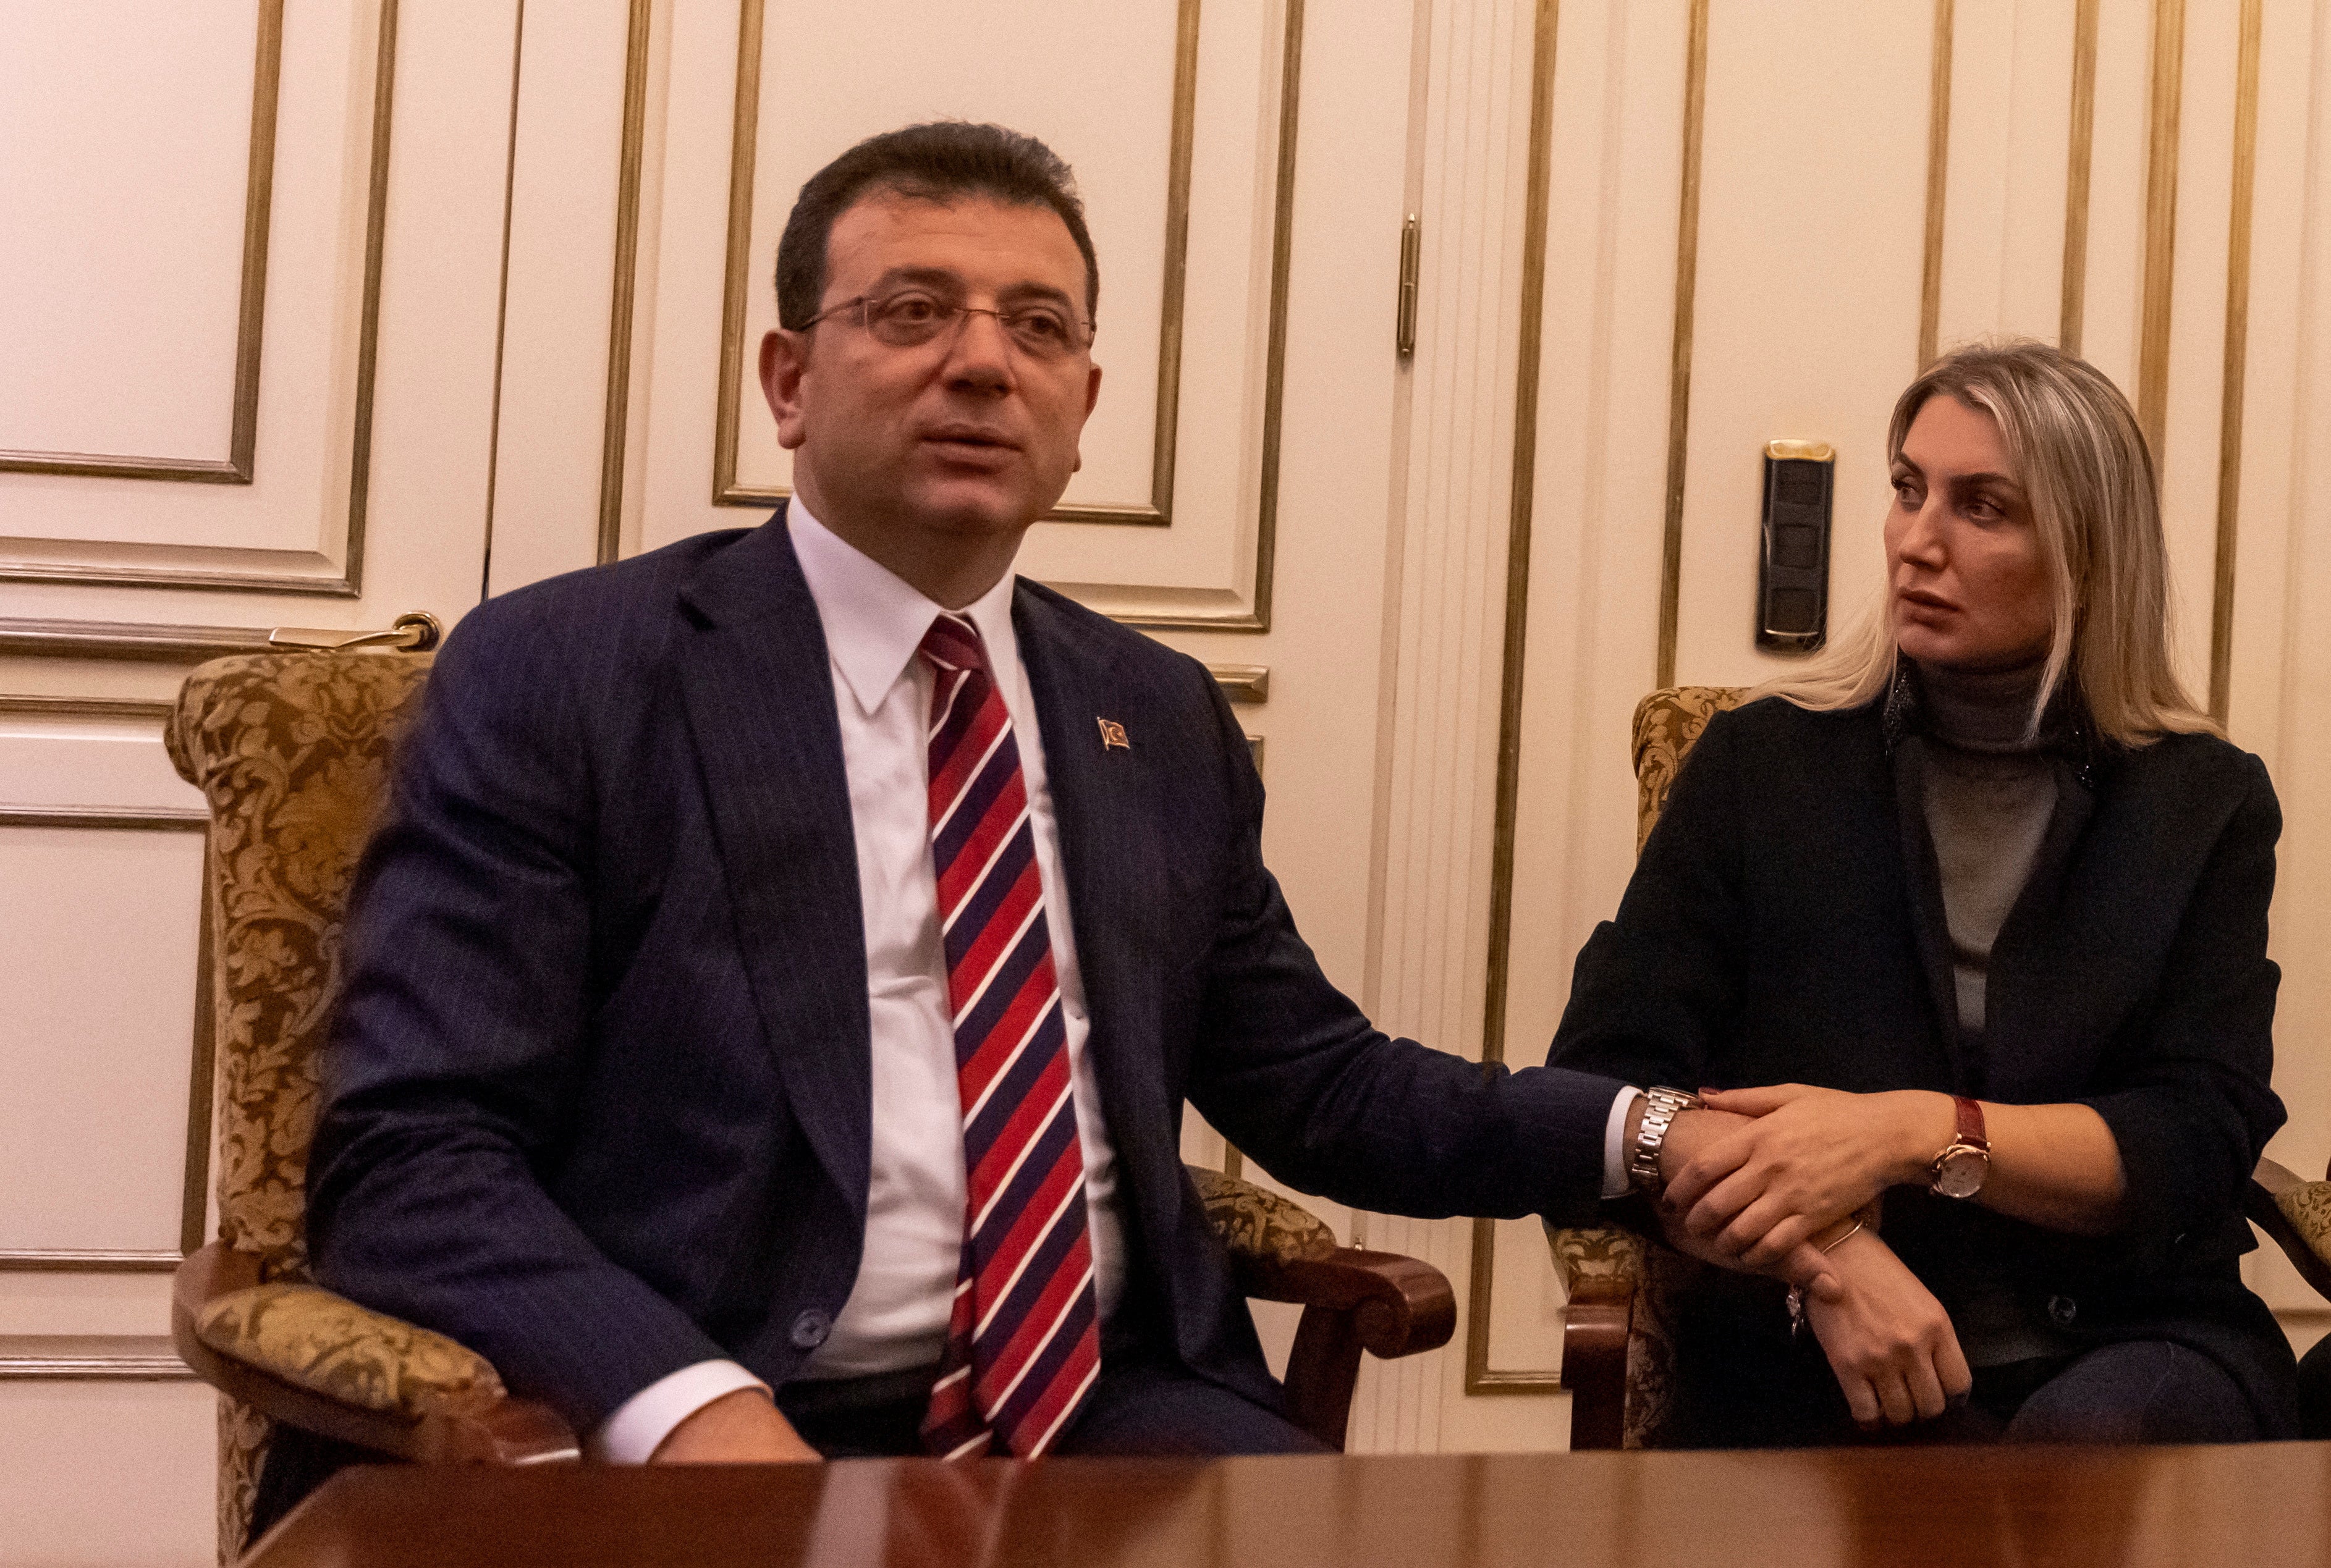 Istanbul mayor Ekrem Imamoglu and his wife Dilek sit at his office as a Turkish court sentenced him to more than two years in prison